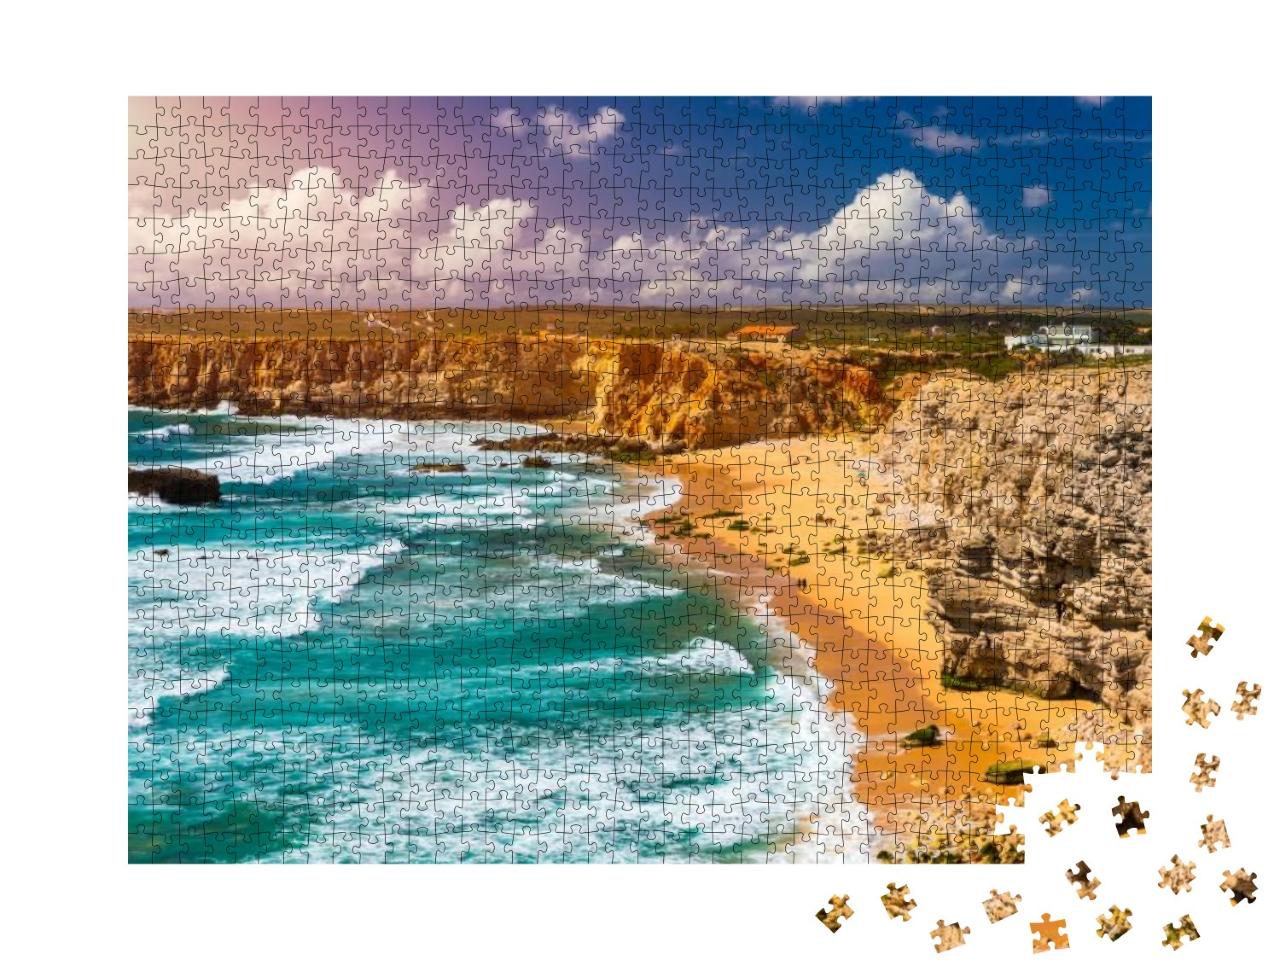 Panorama View of Praia Do Tonel Tonel Beach in Cape Sagre... Jigsaw Puzzle with 1000 pieces